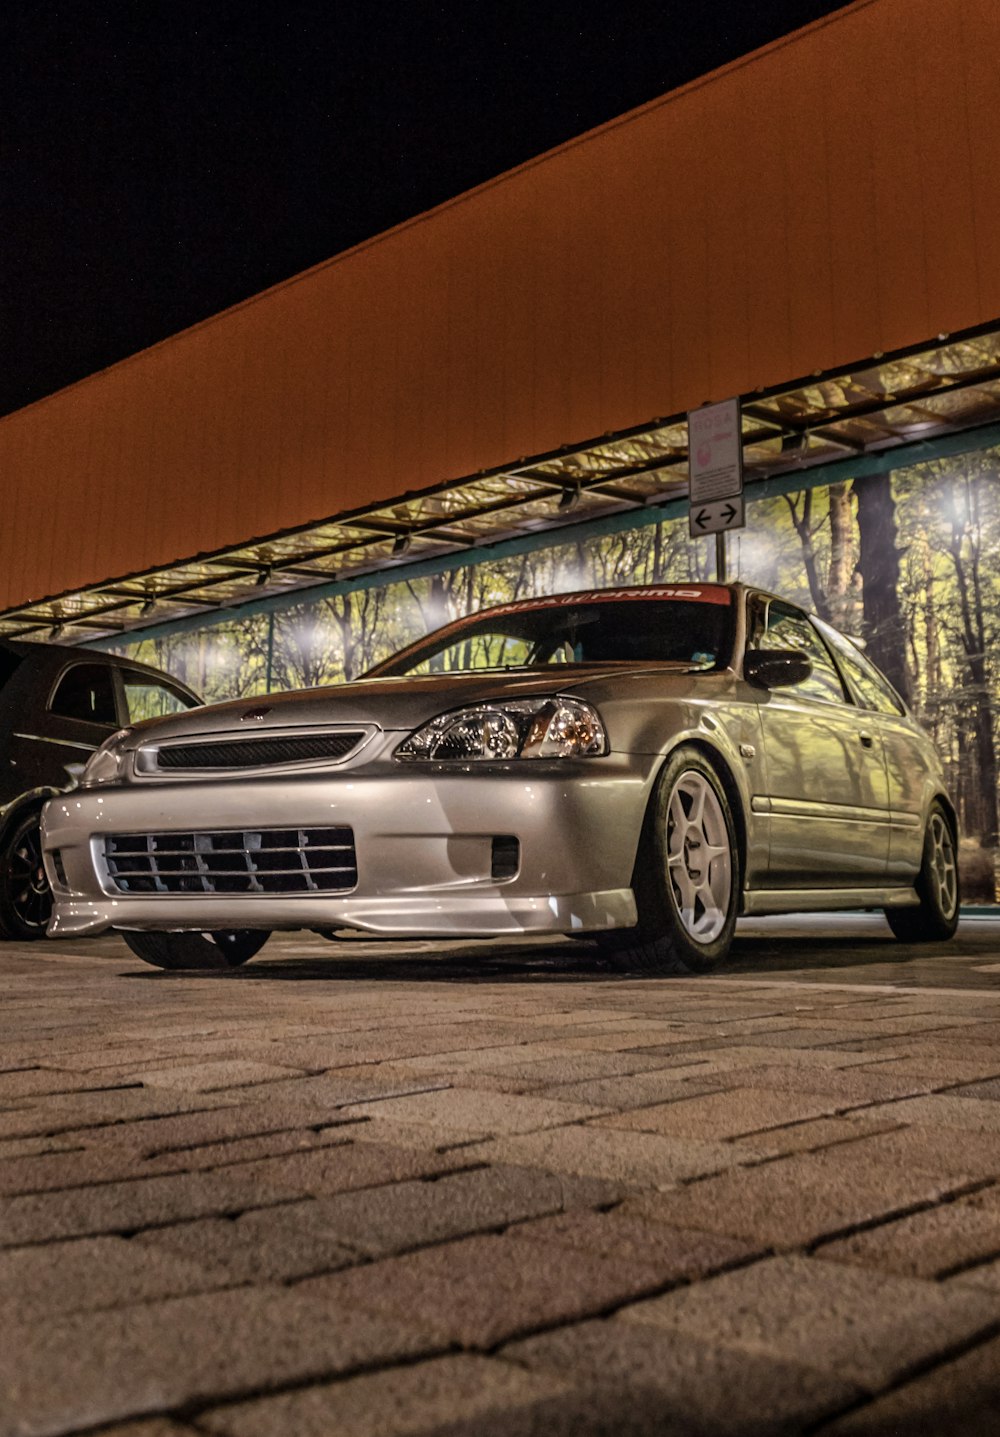 silver Nissan Skyline GT-R coupe parking